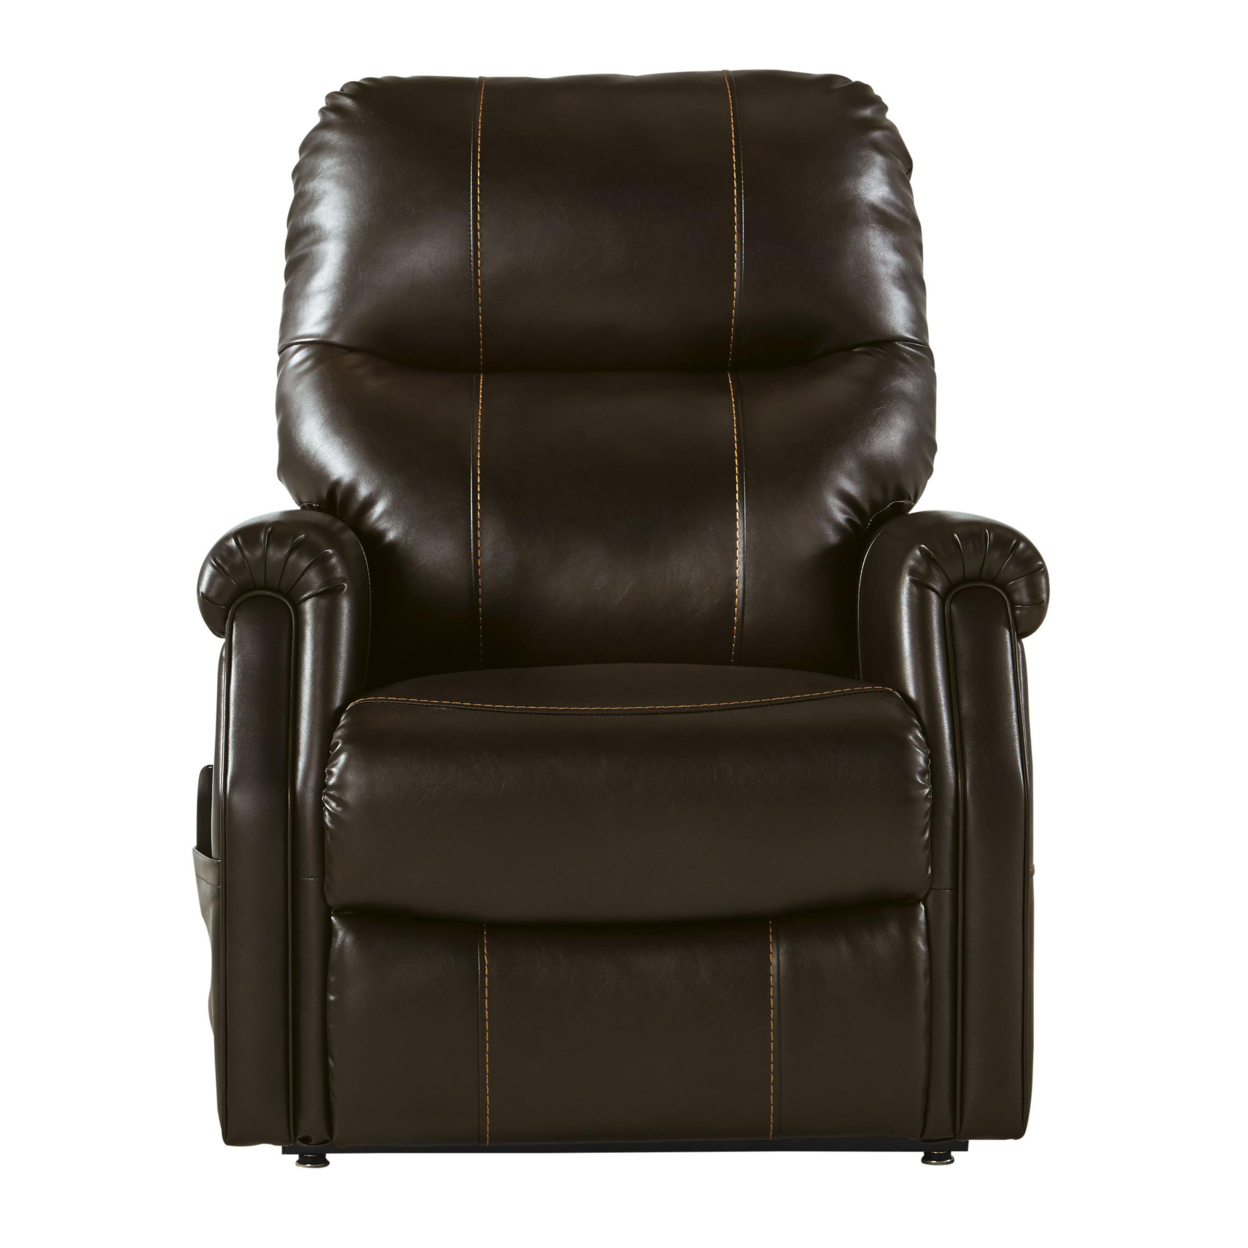 Leatherette Metal Frame Power Lift Recliner With Tufted Back, Brown- Saltoro Sherpi